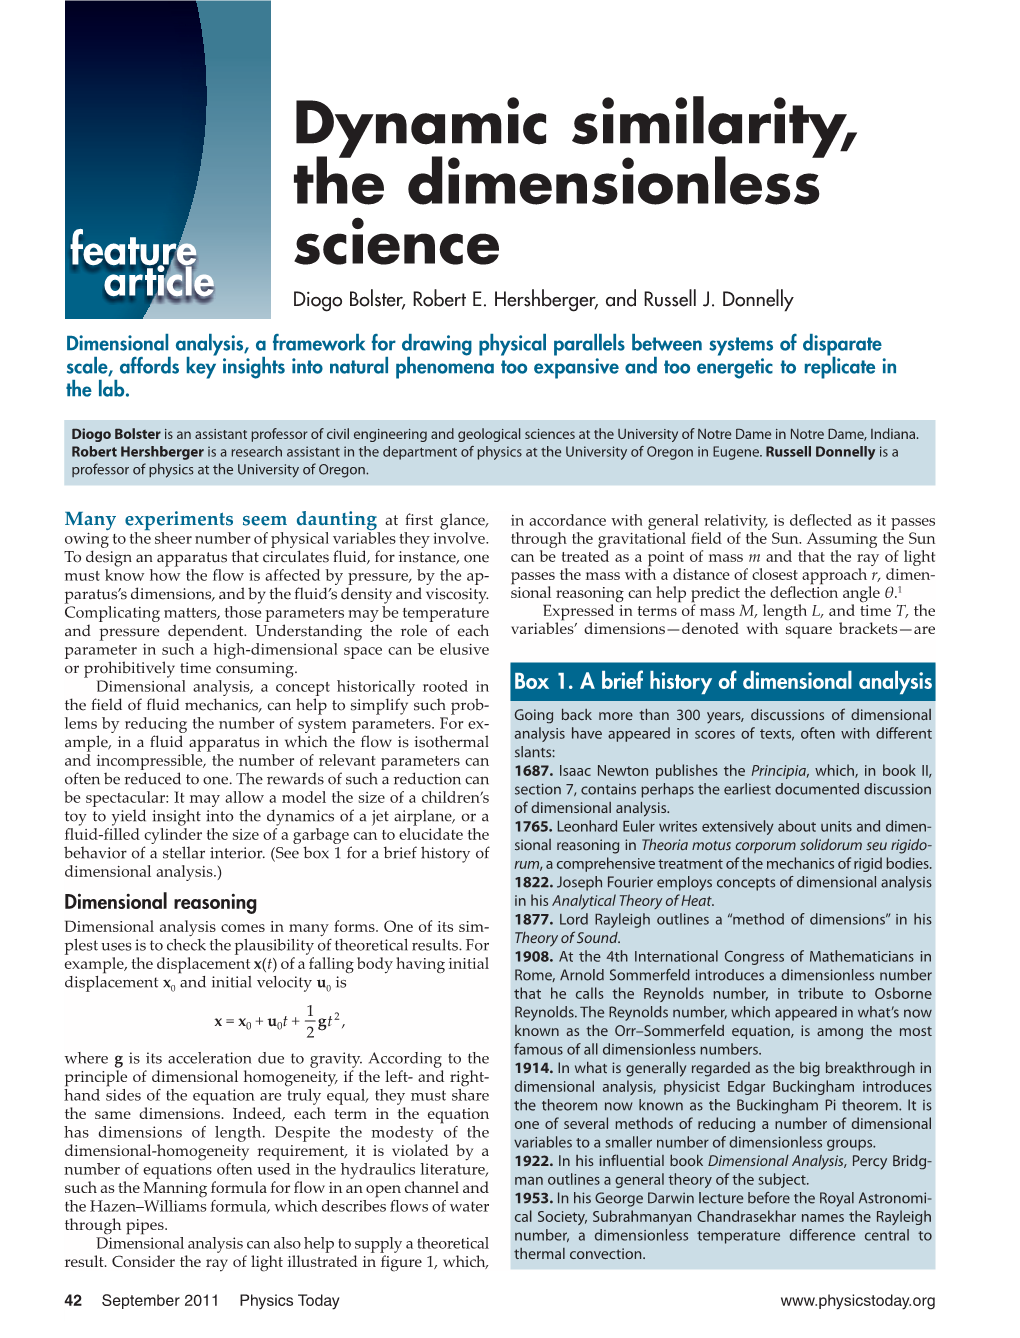 Dynamic Similarity, the Dimensionless Science